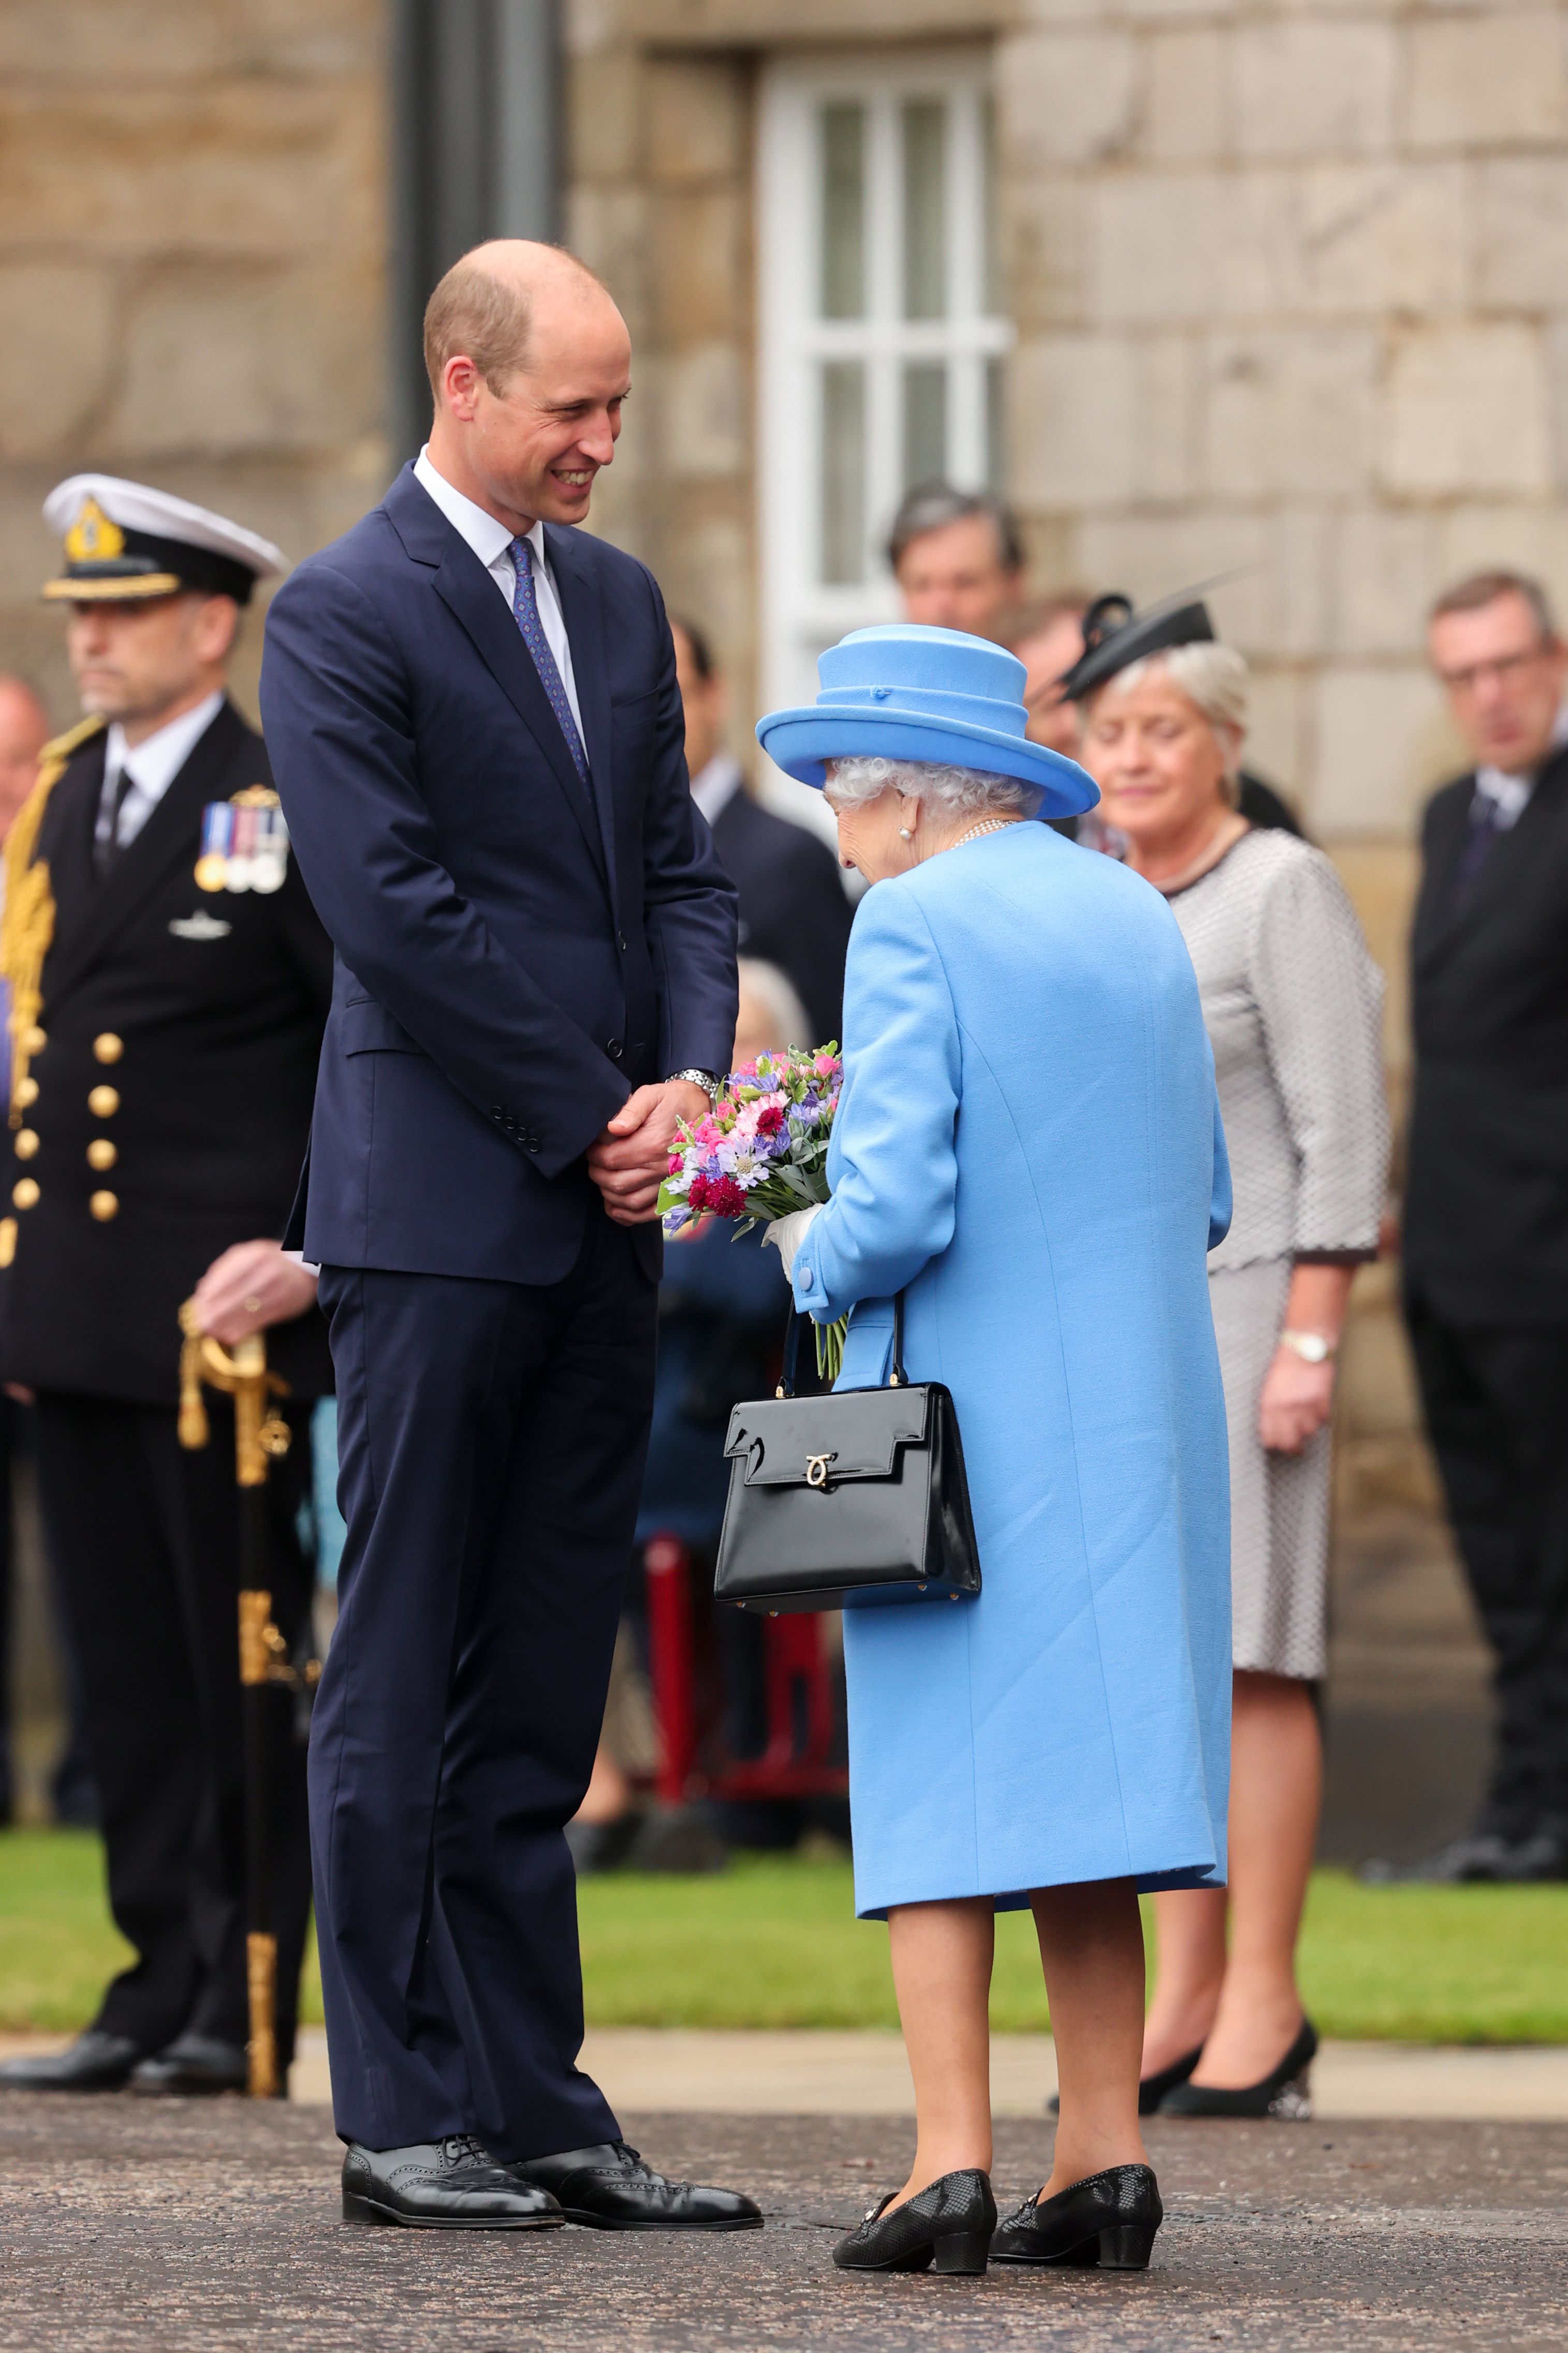 Prince William and Queen Elizabeth II at The Palace Of Holyrood House on June 28, 2021, in Edinburgh, Scotland | Photo: Chris Jackson - WPA Pool/Getty Images